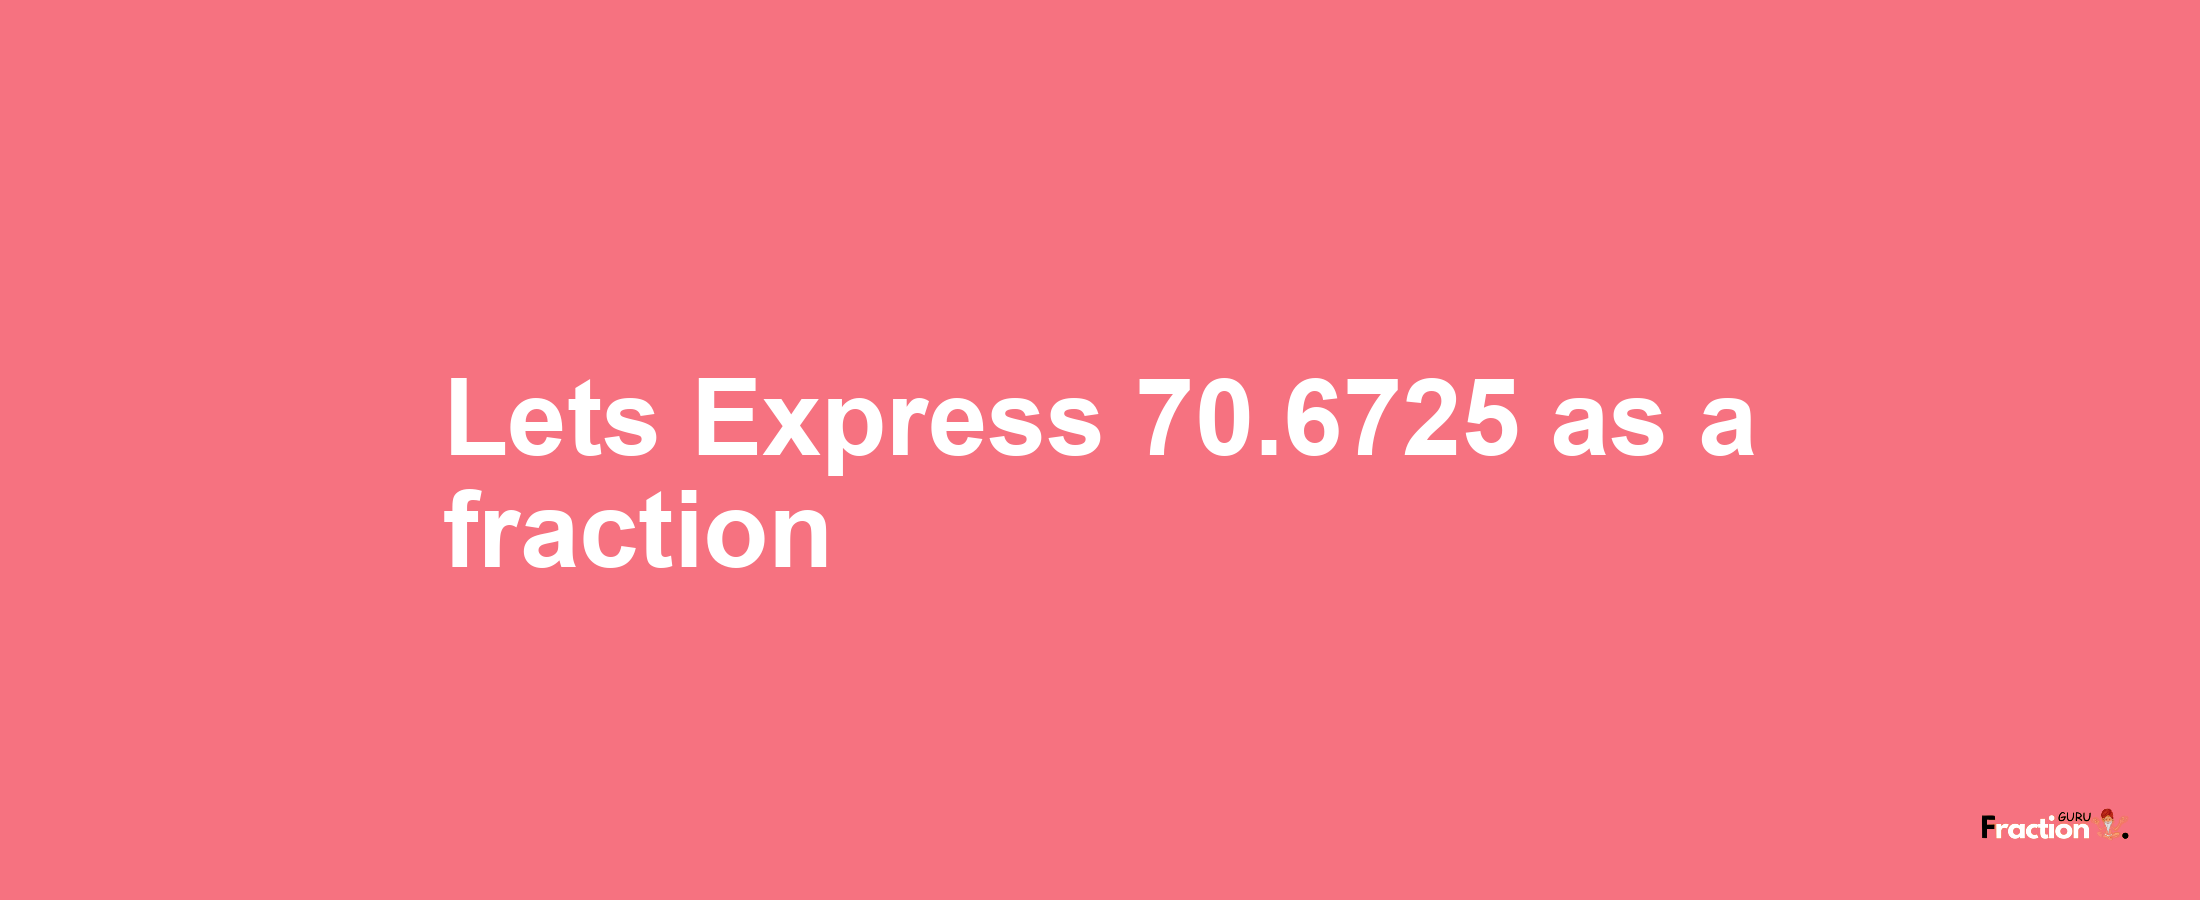 Lets Express 70.6725 as afraction